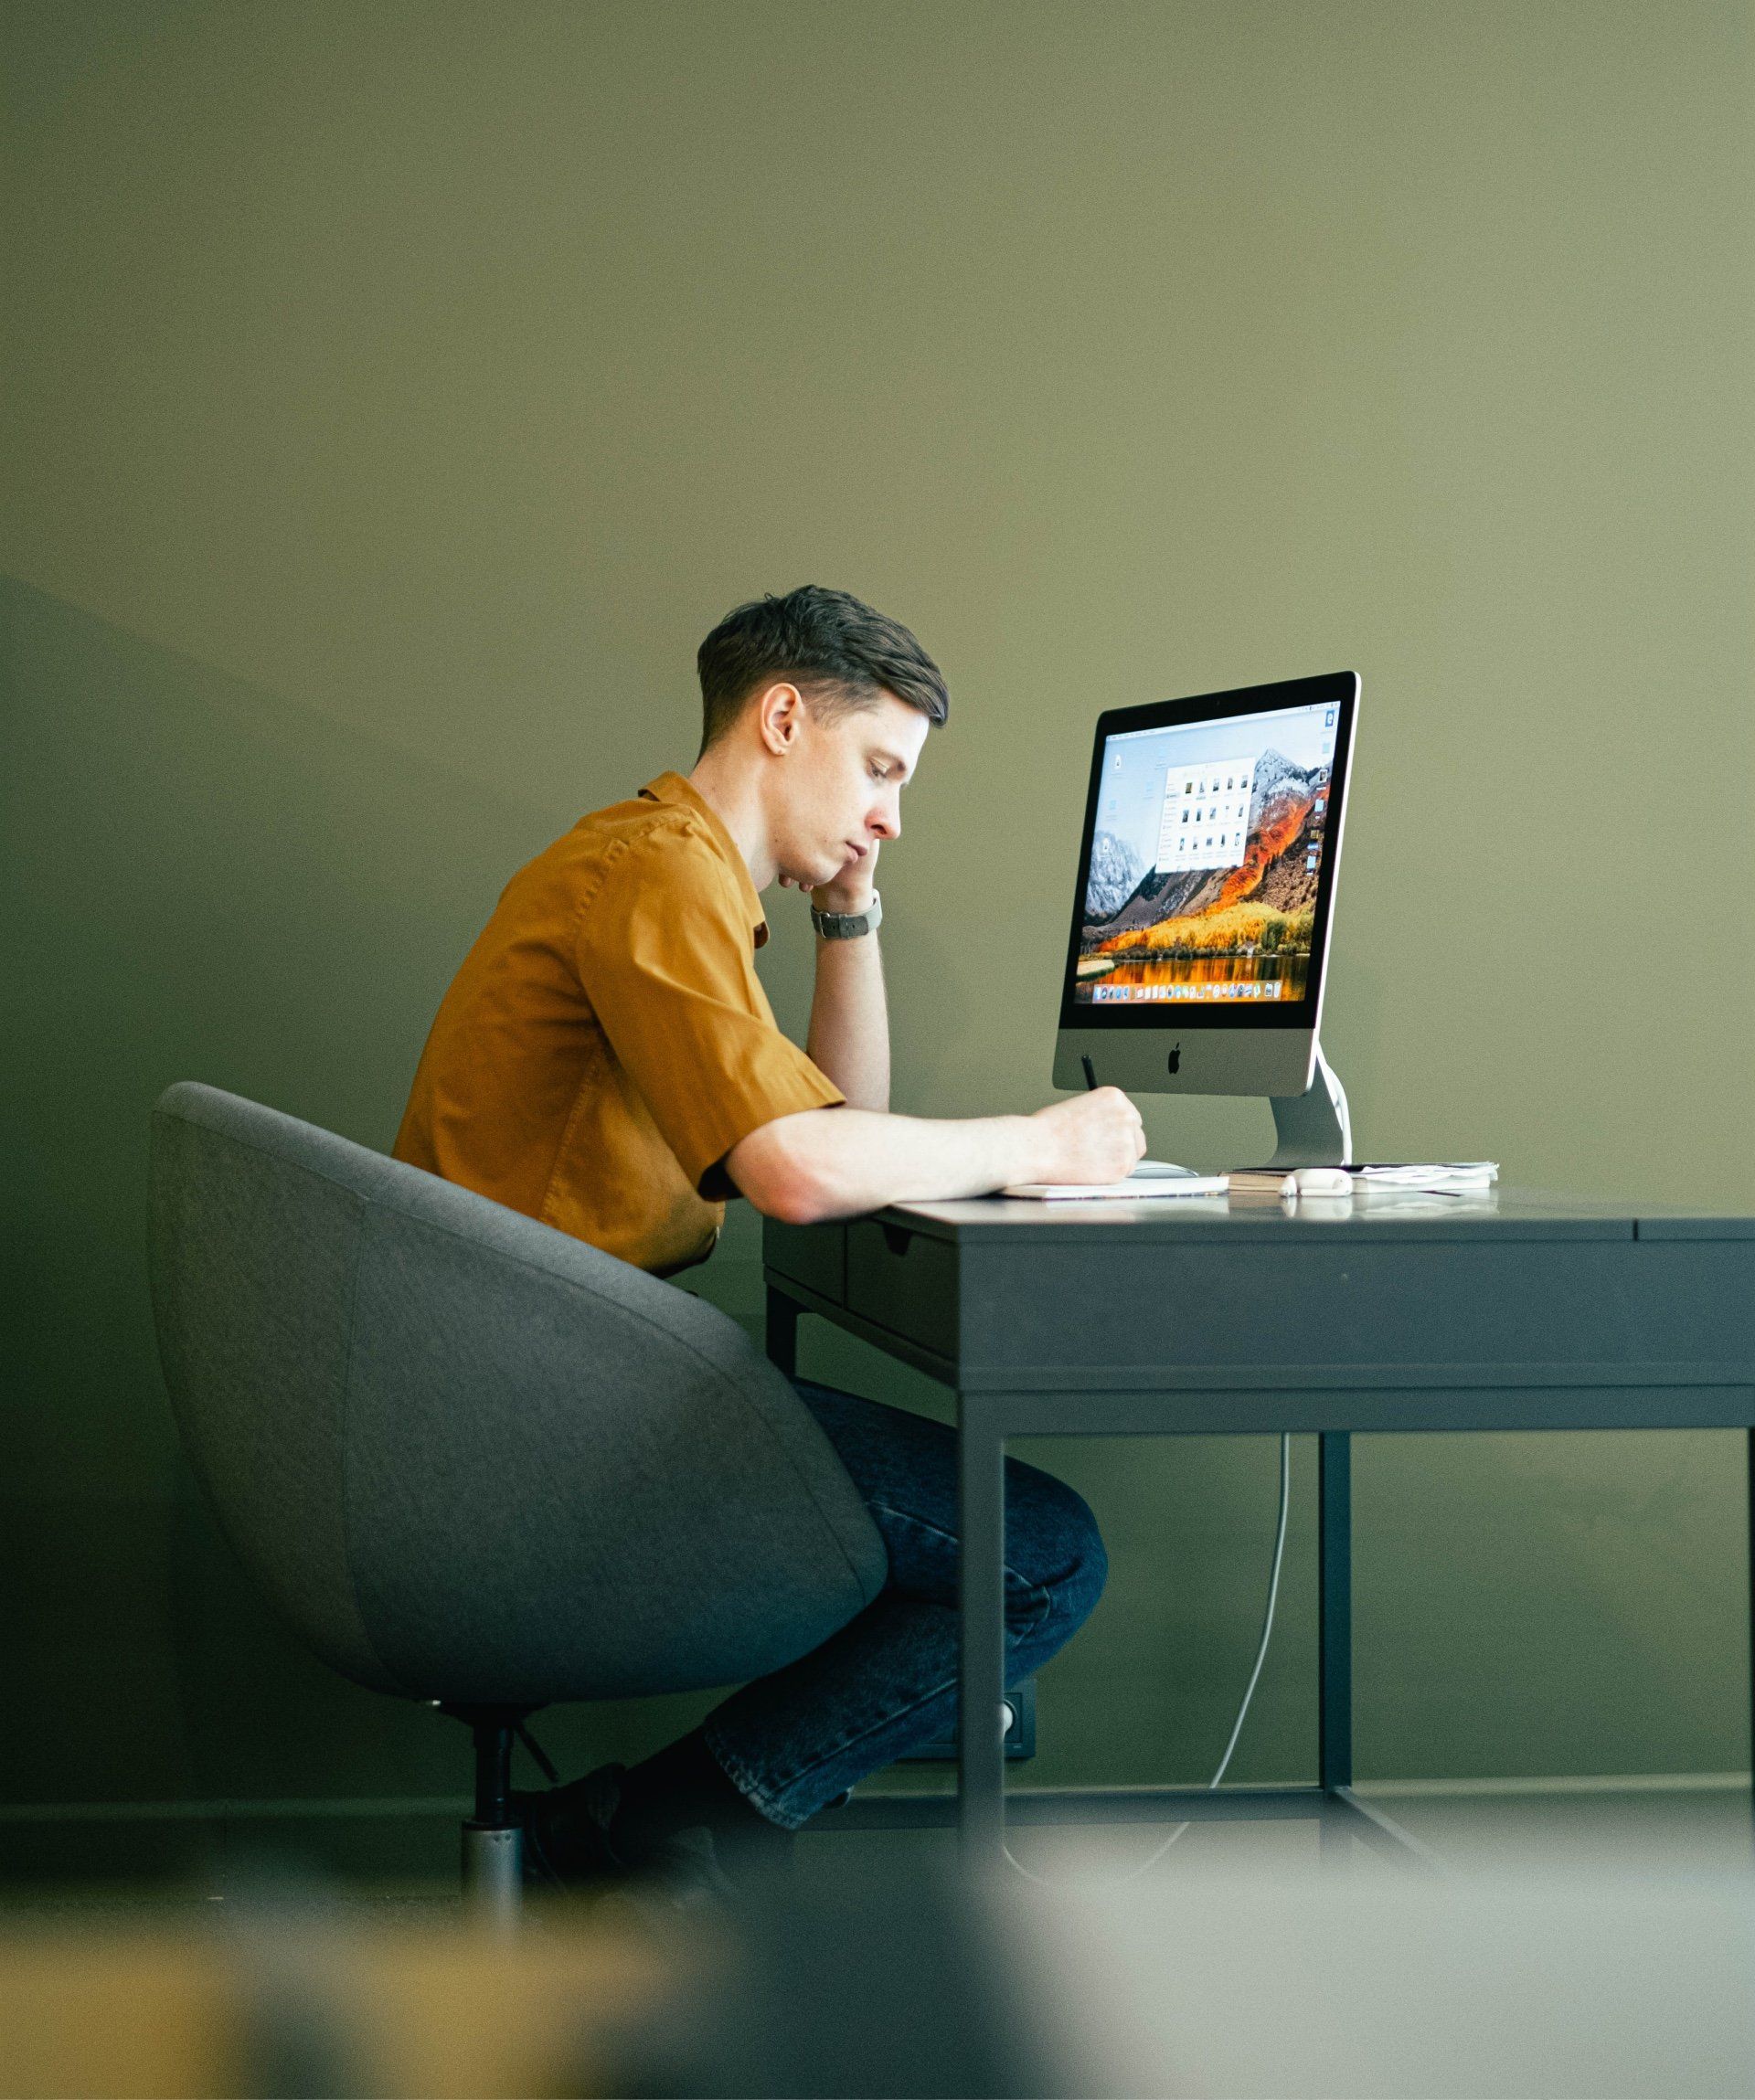 A man is sitting at a desk working on a computer